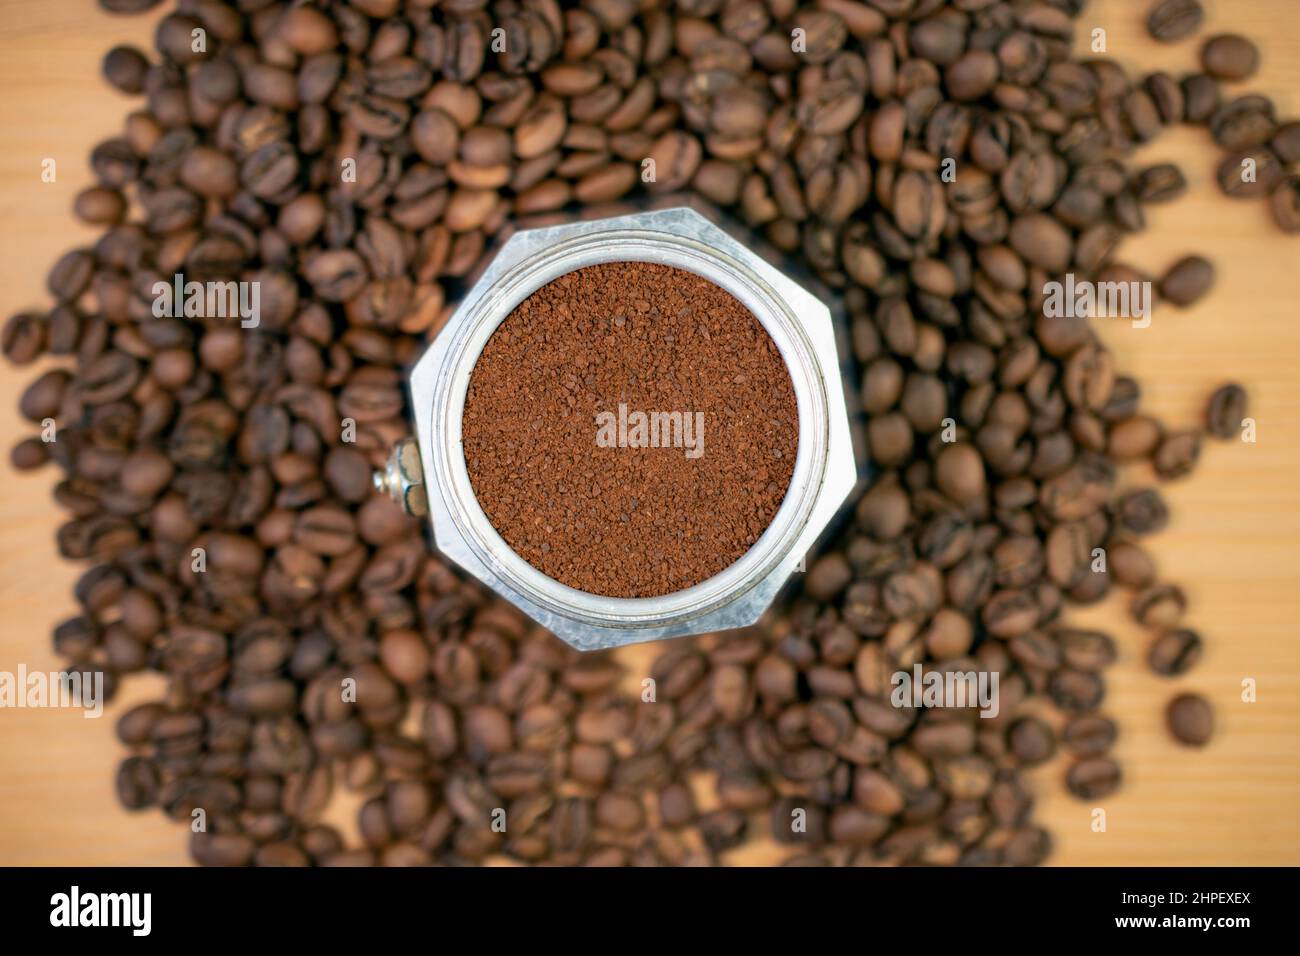 Stove top coffee machine moka percolator filled with ground coffee, surrounded by coffee beans Stock Photo